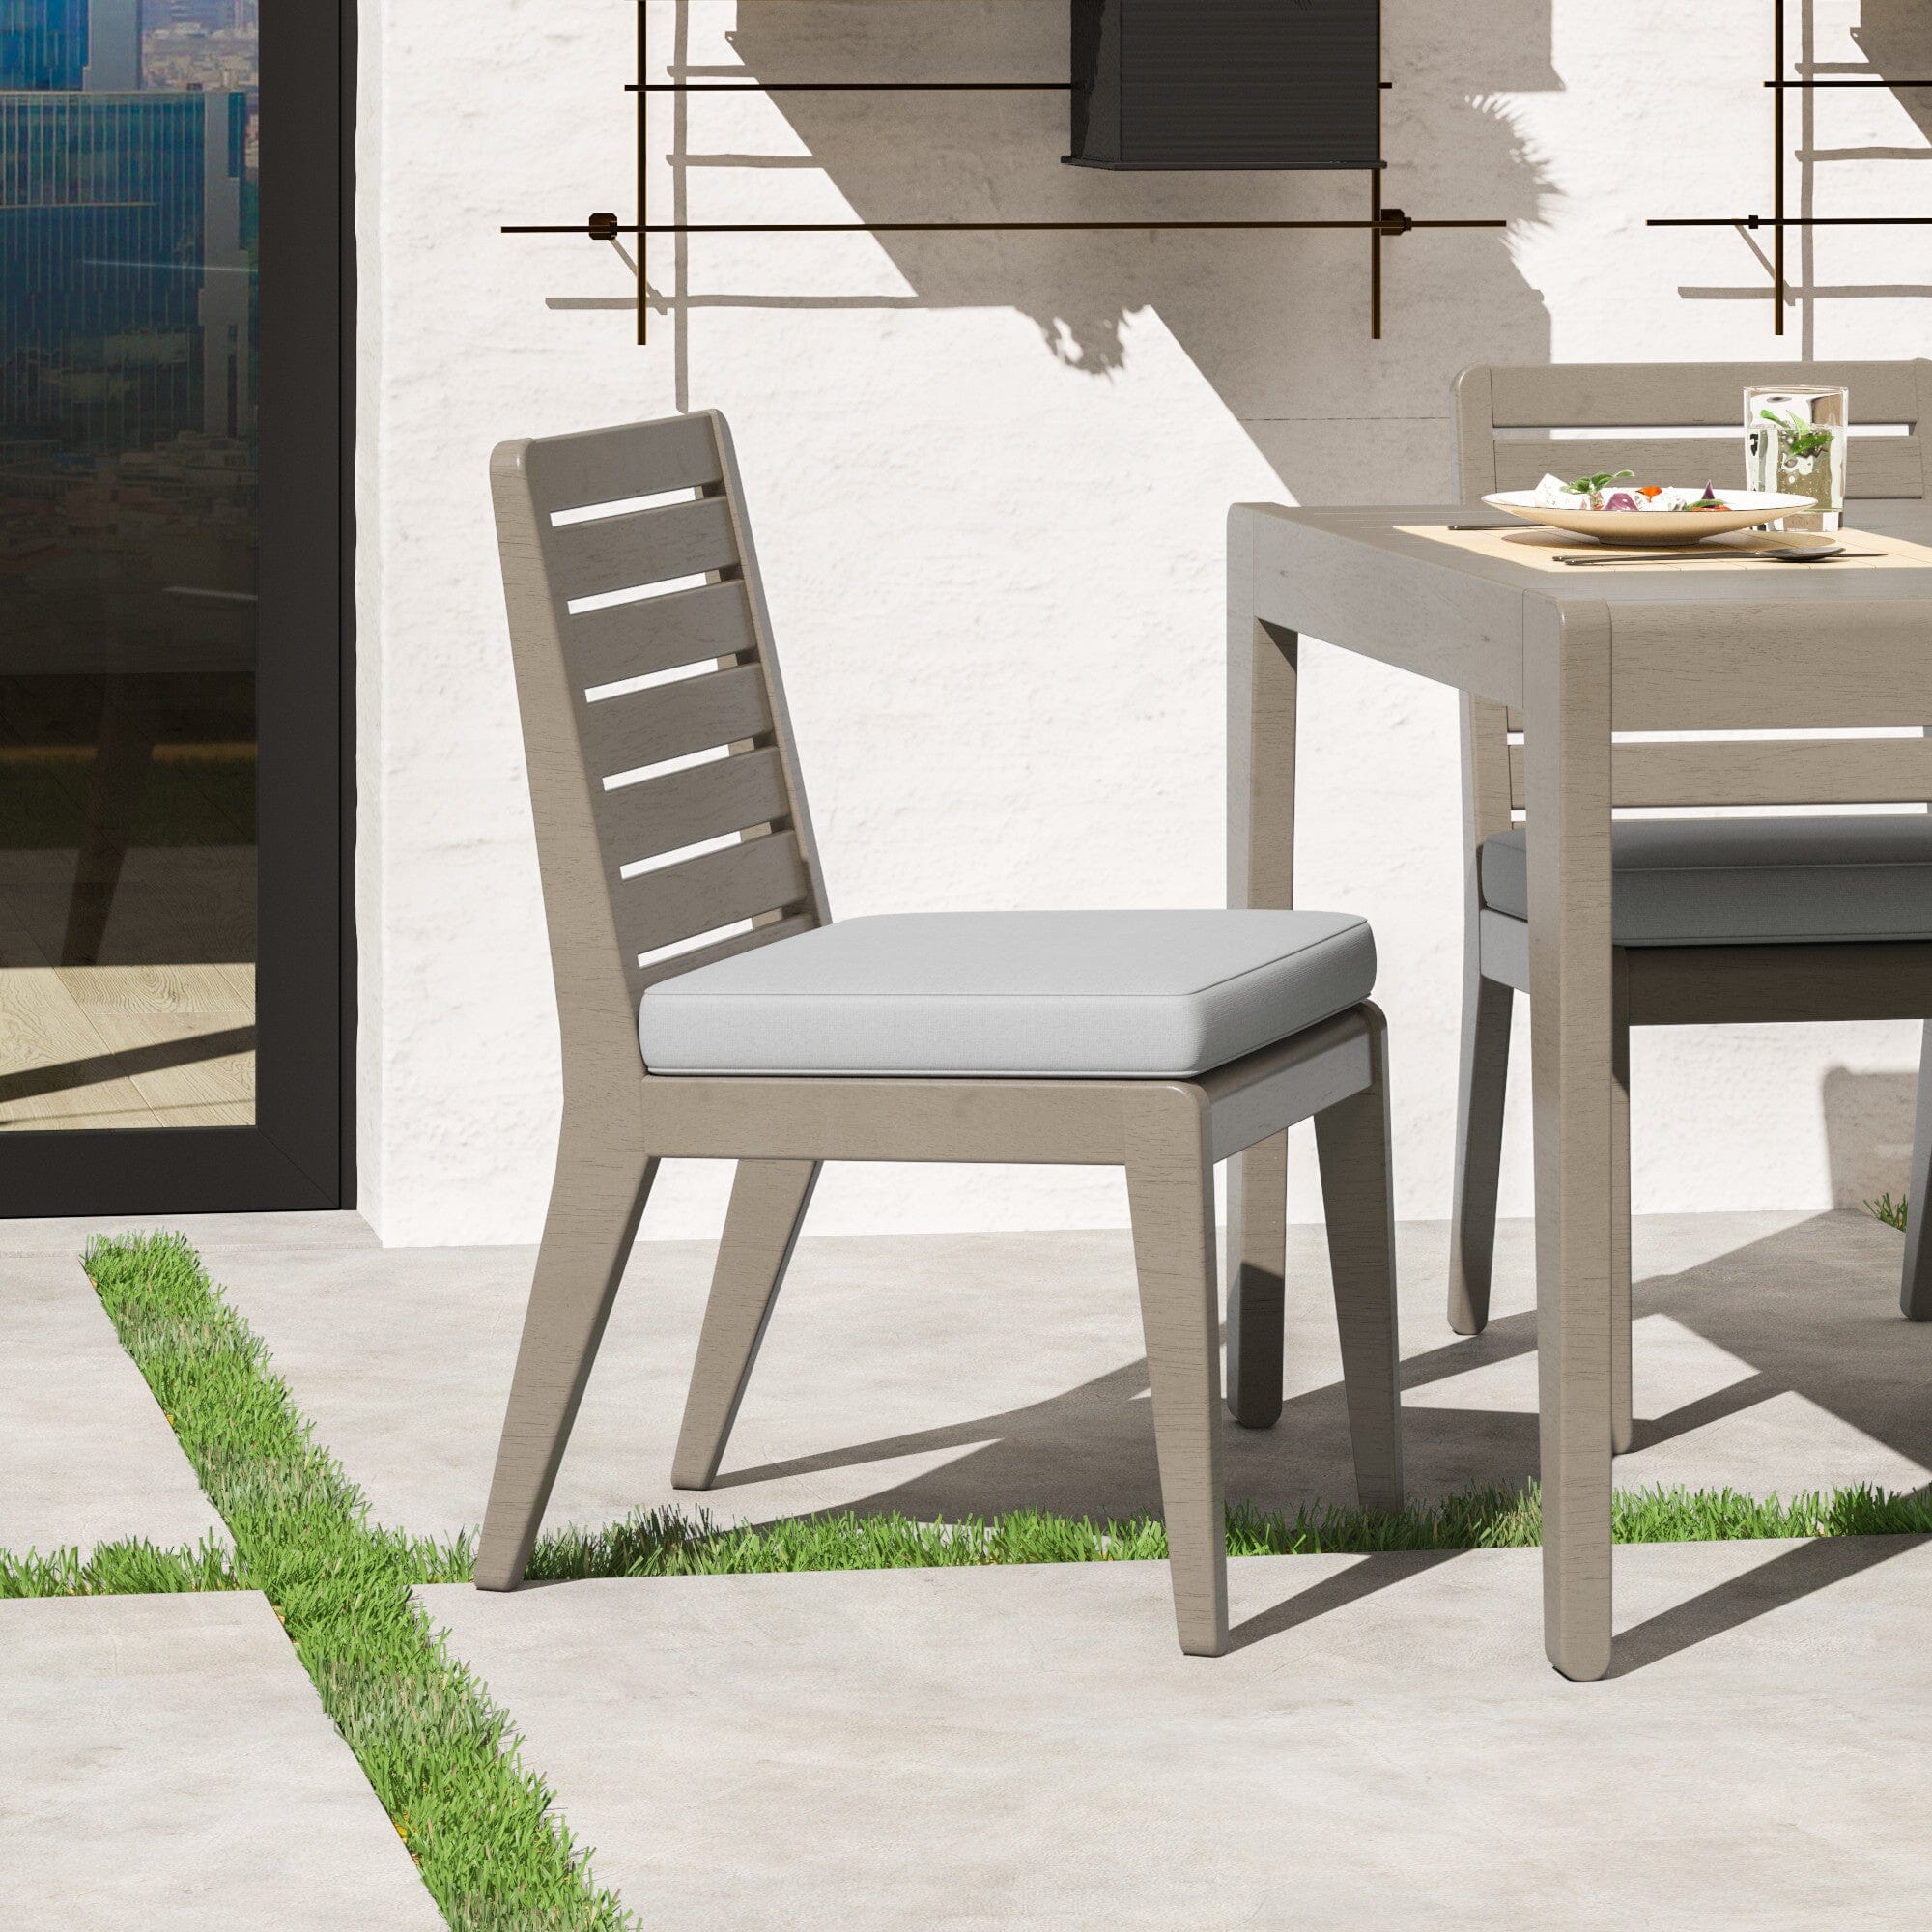 Transitional Outdoor Dining Chair Pair By Sustain Outdoor Dining Chair Sustain